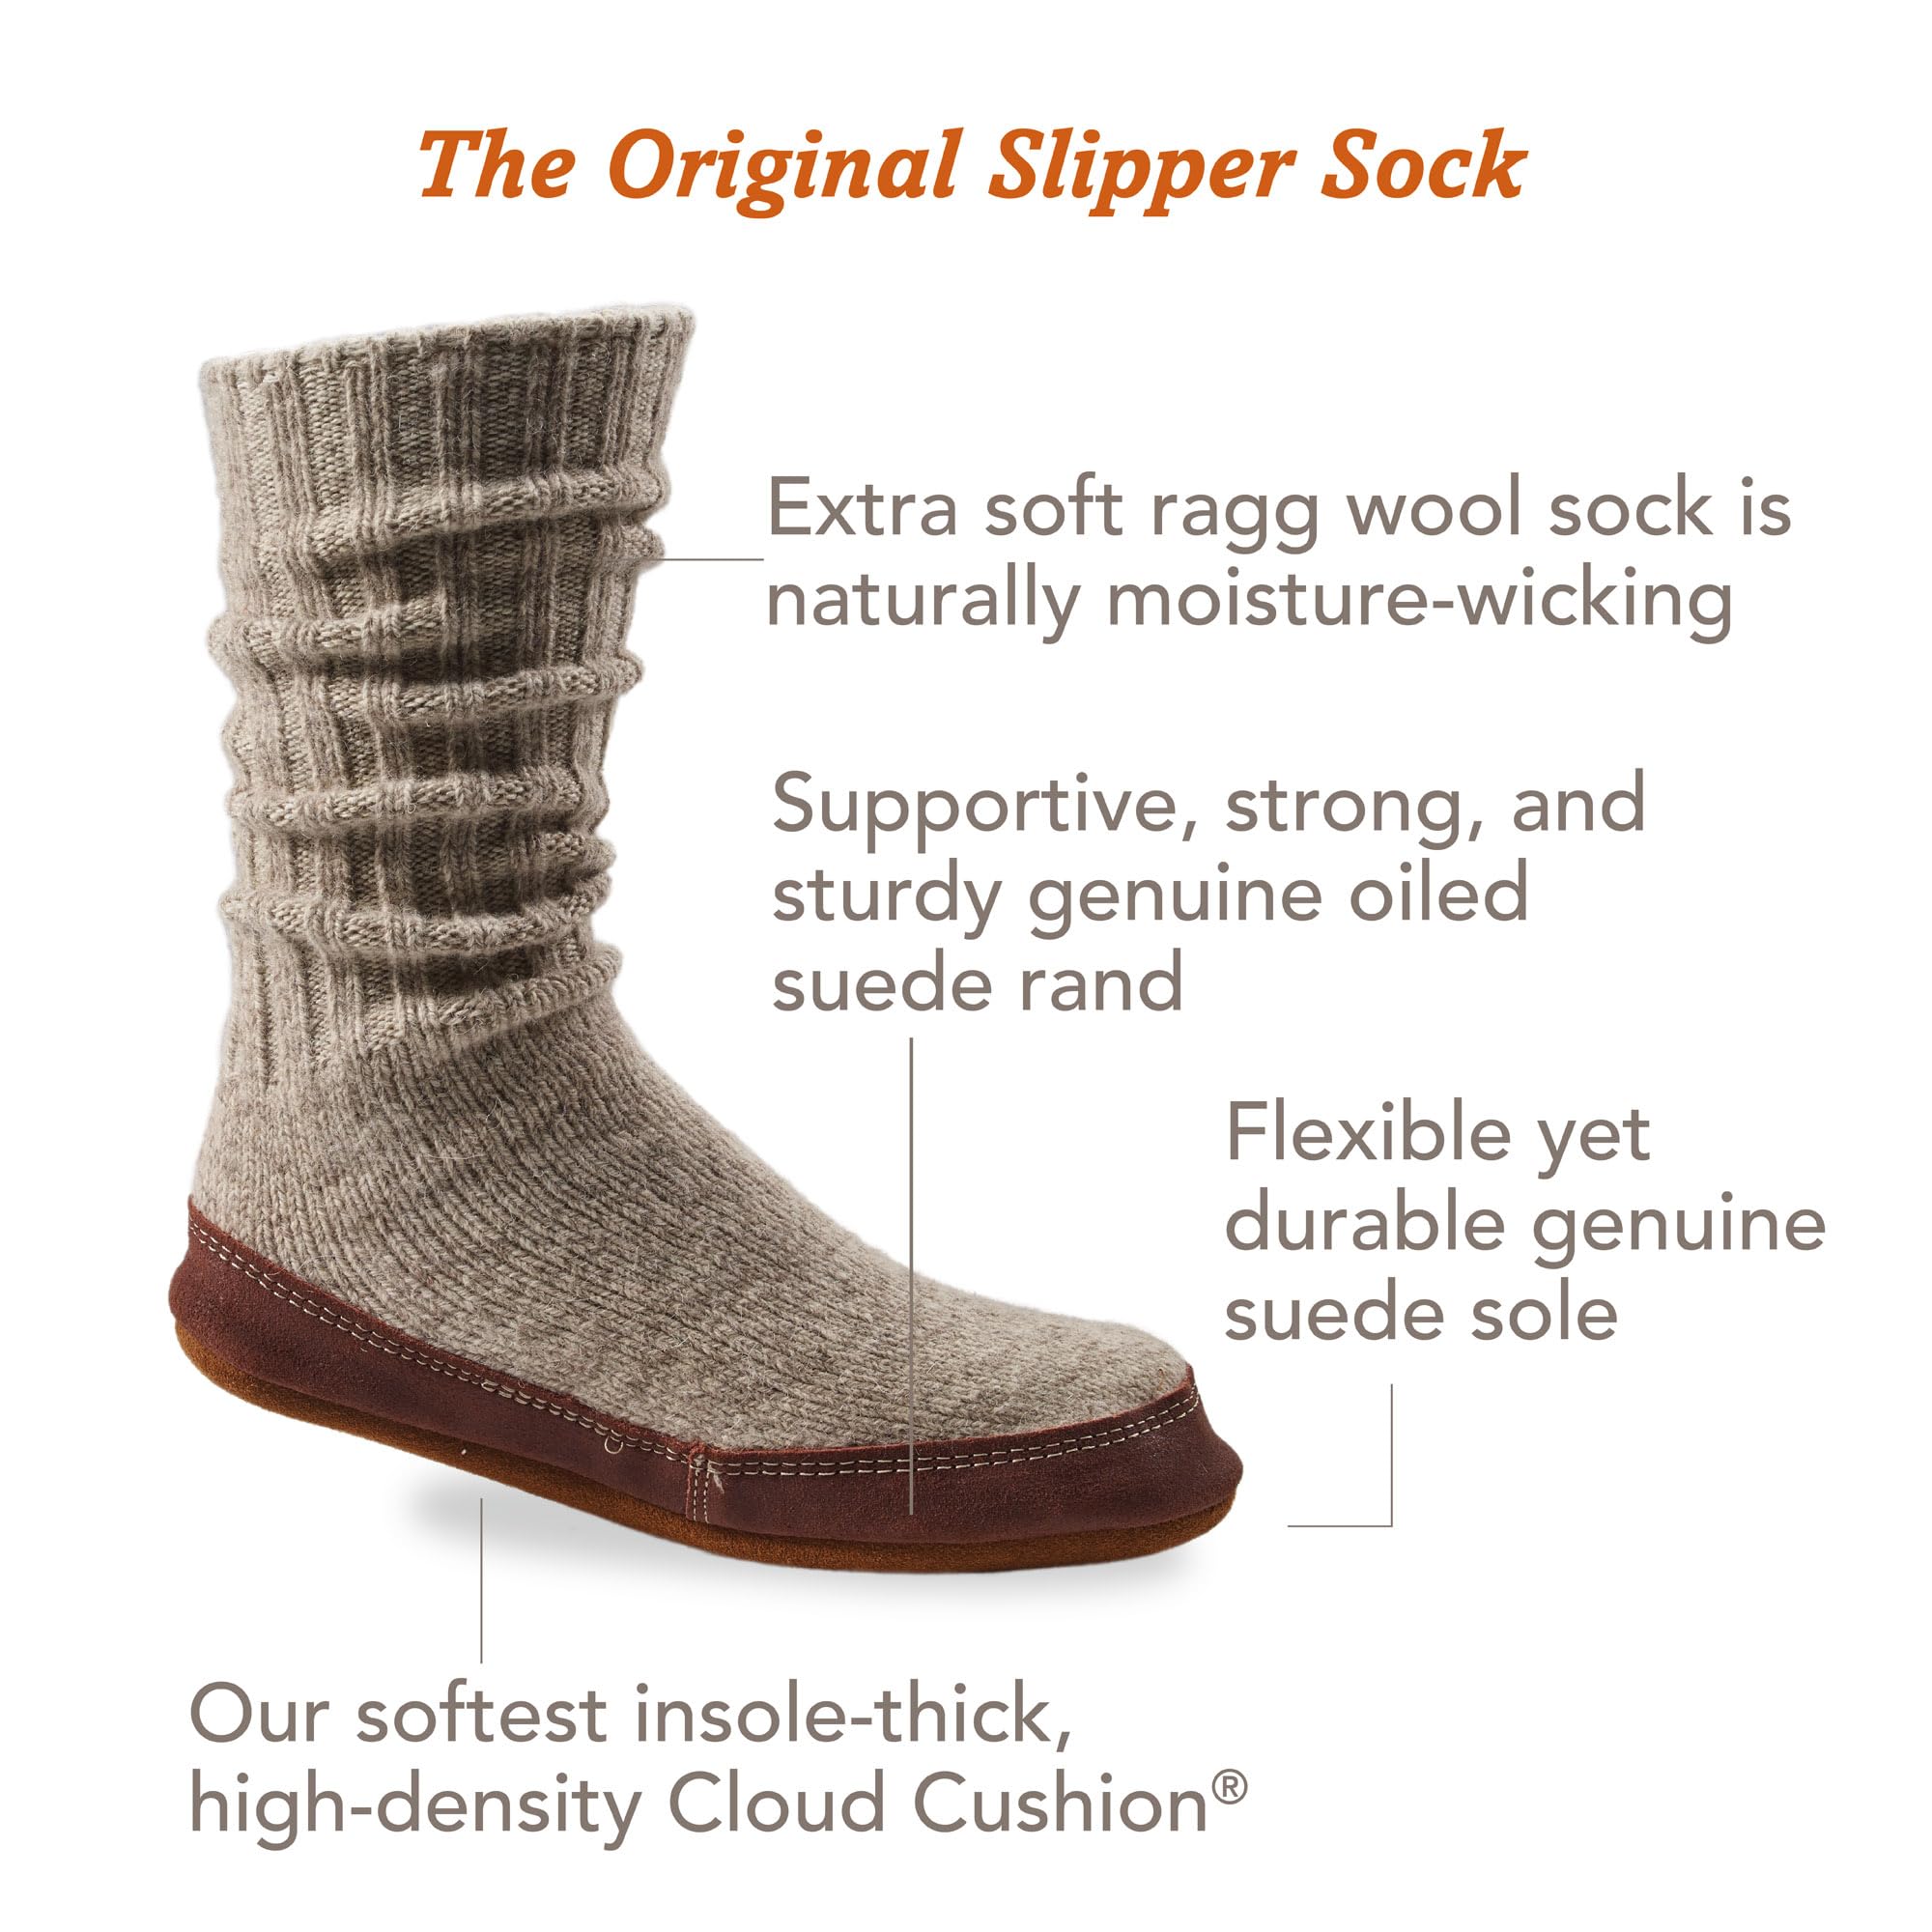 Acorn Original Men's and Women's Slipper Sock with Cloud-Like Feel, Soft and Moisture Wicking Crew Length, Genuine Suede Sole